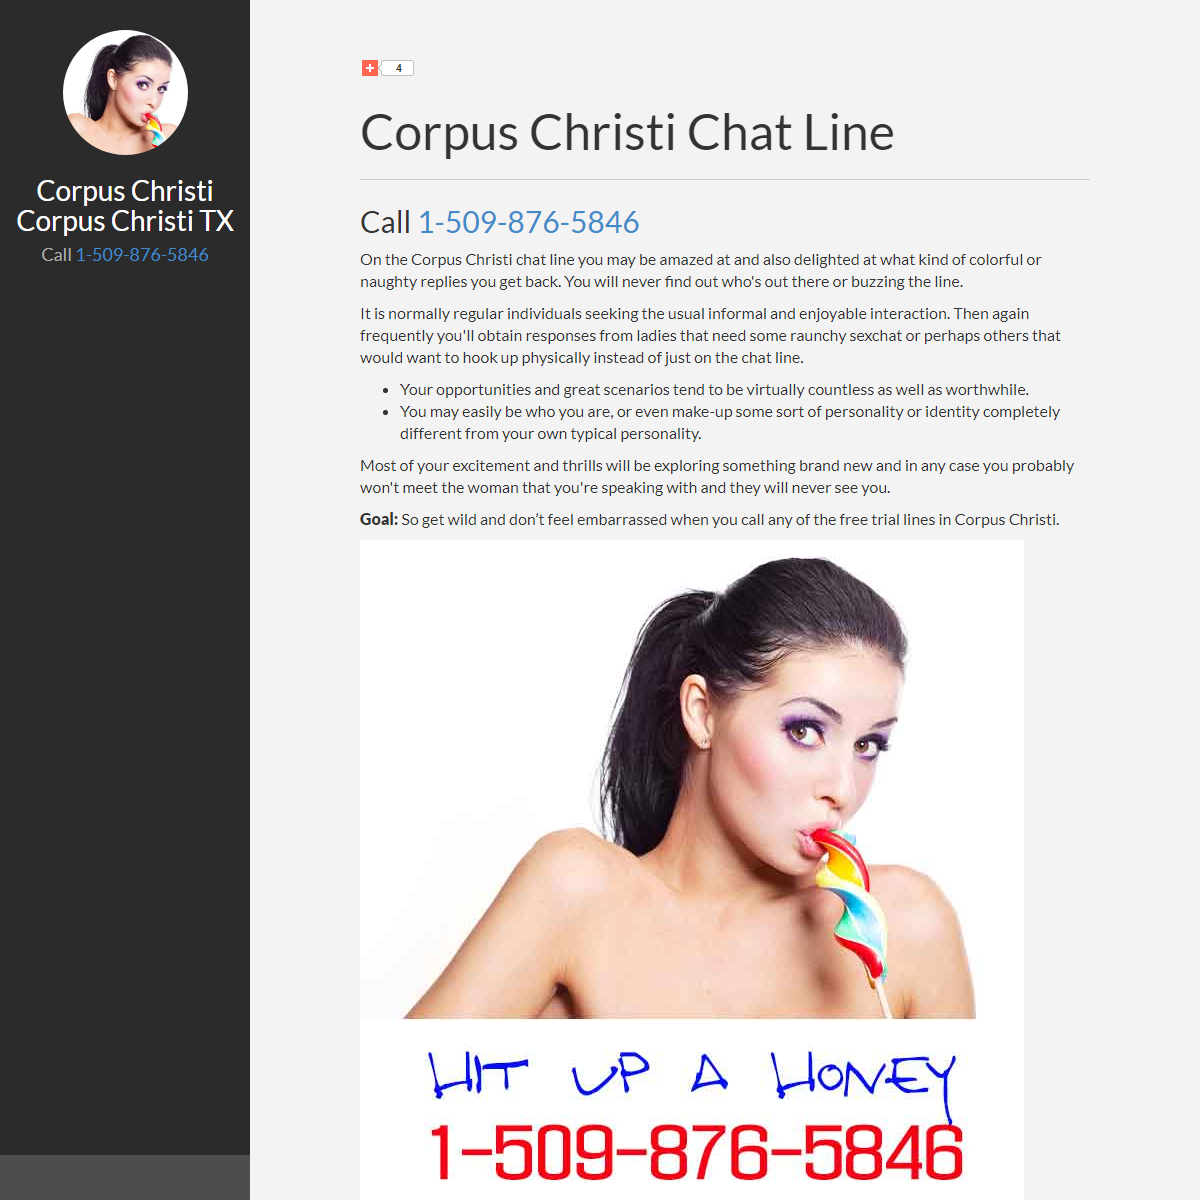 Corpus Christi Chat Line - Free Trial Chat